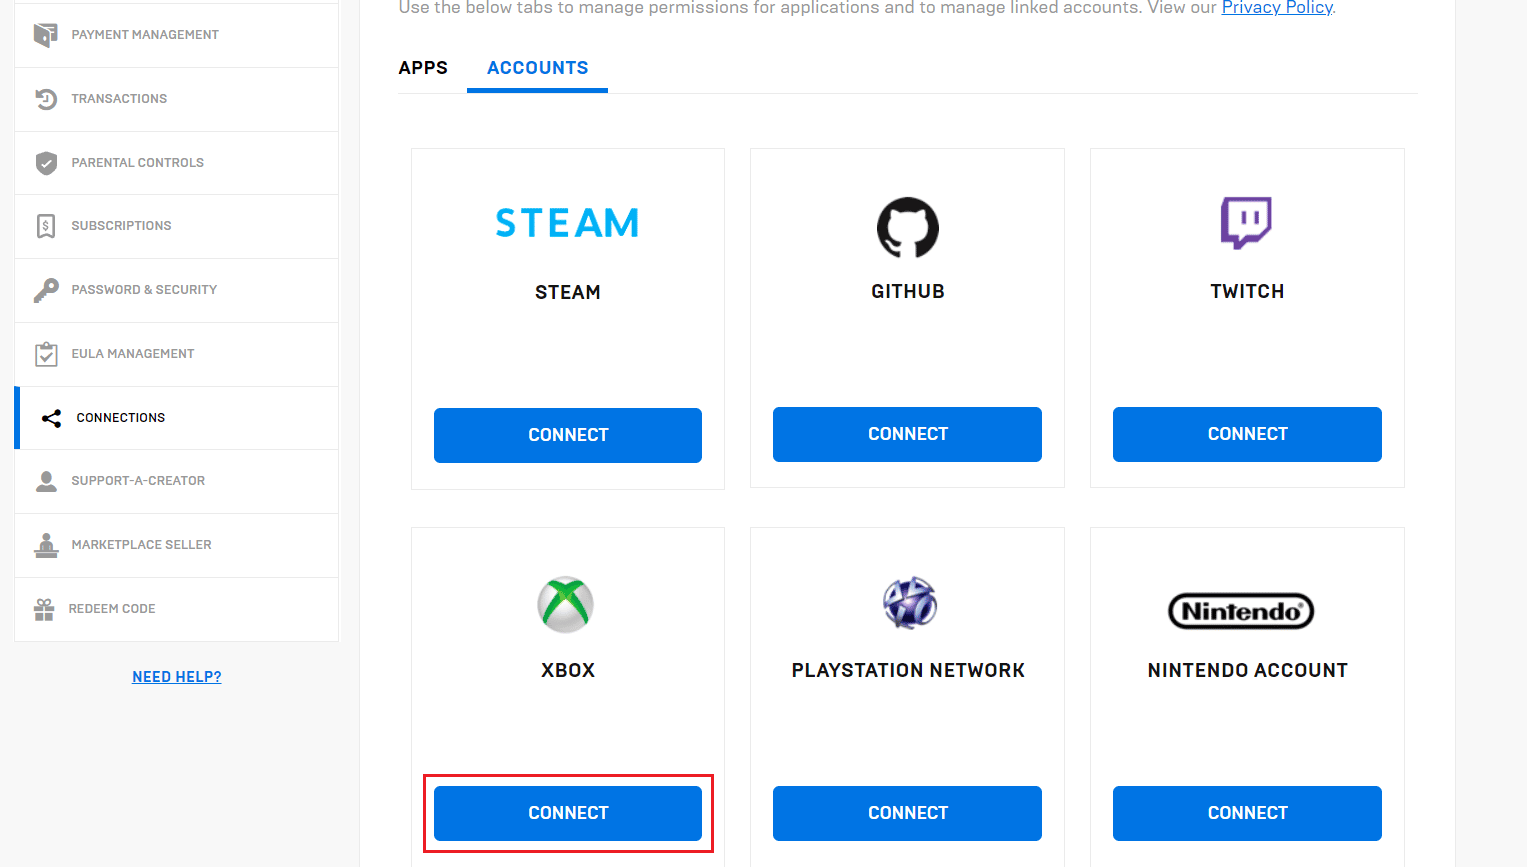 Click on the CONNECT option for the desired account